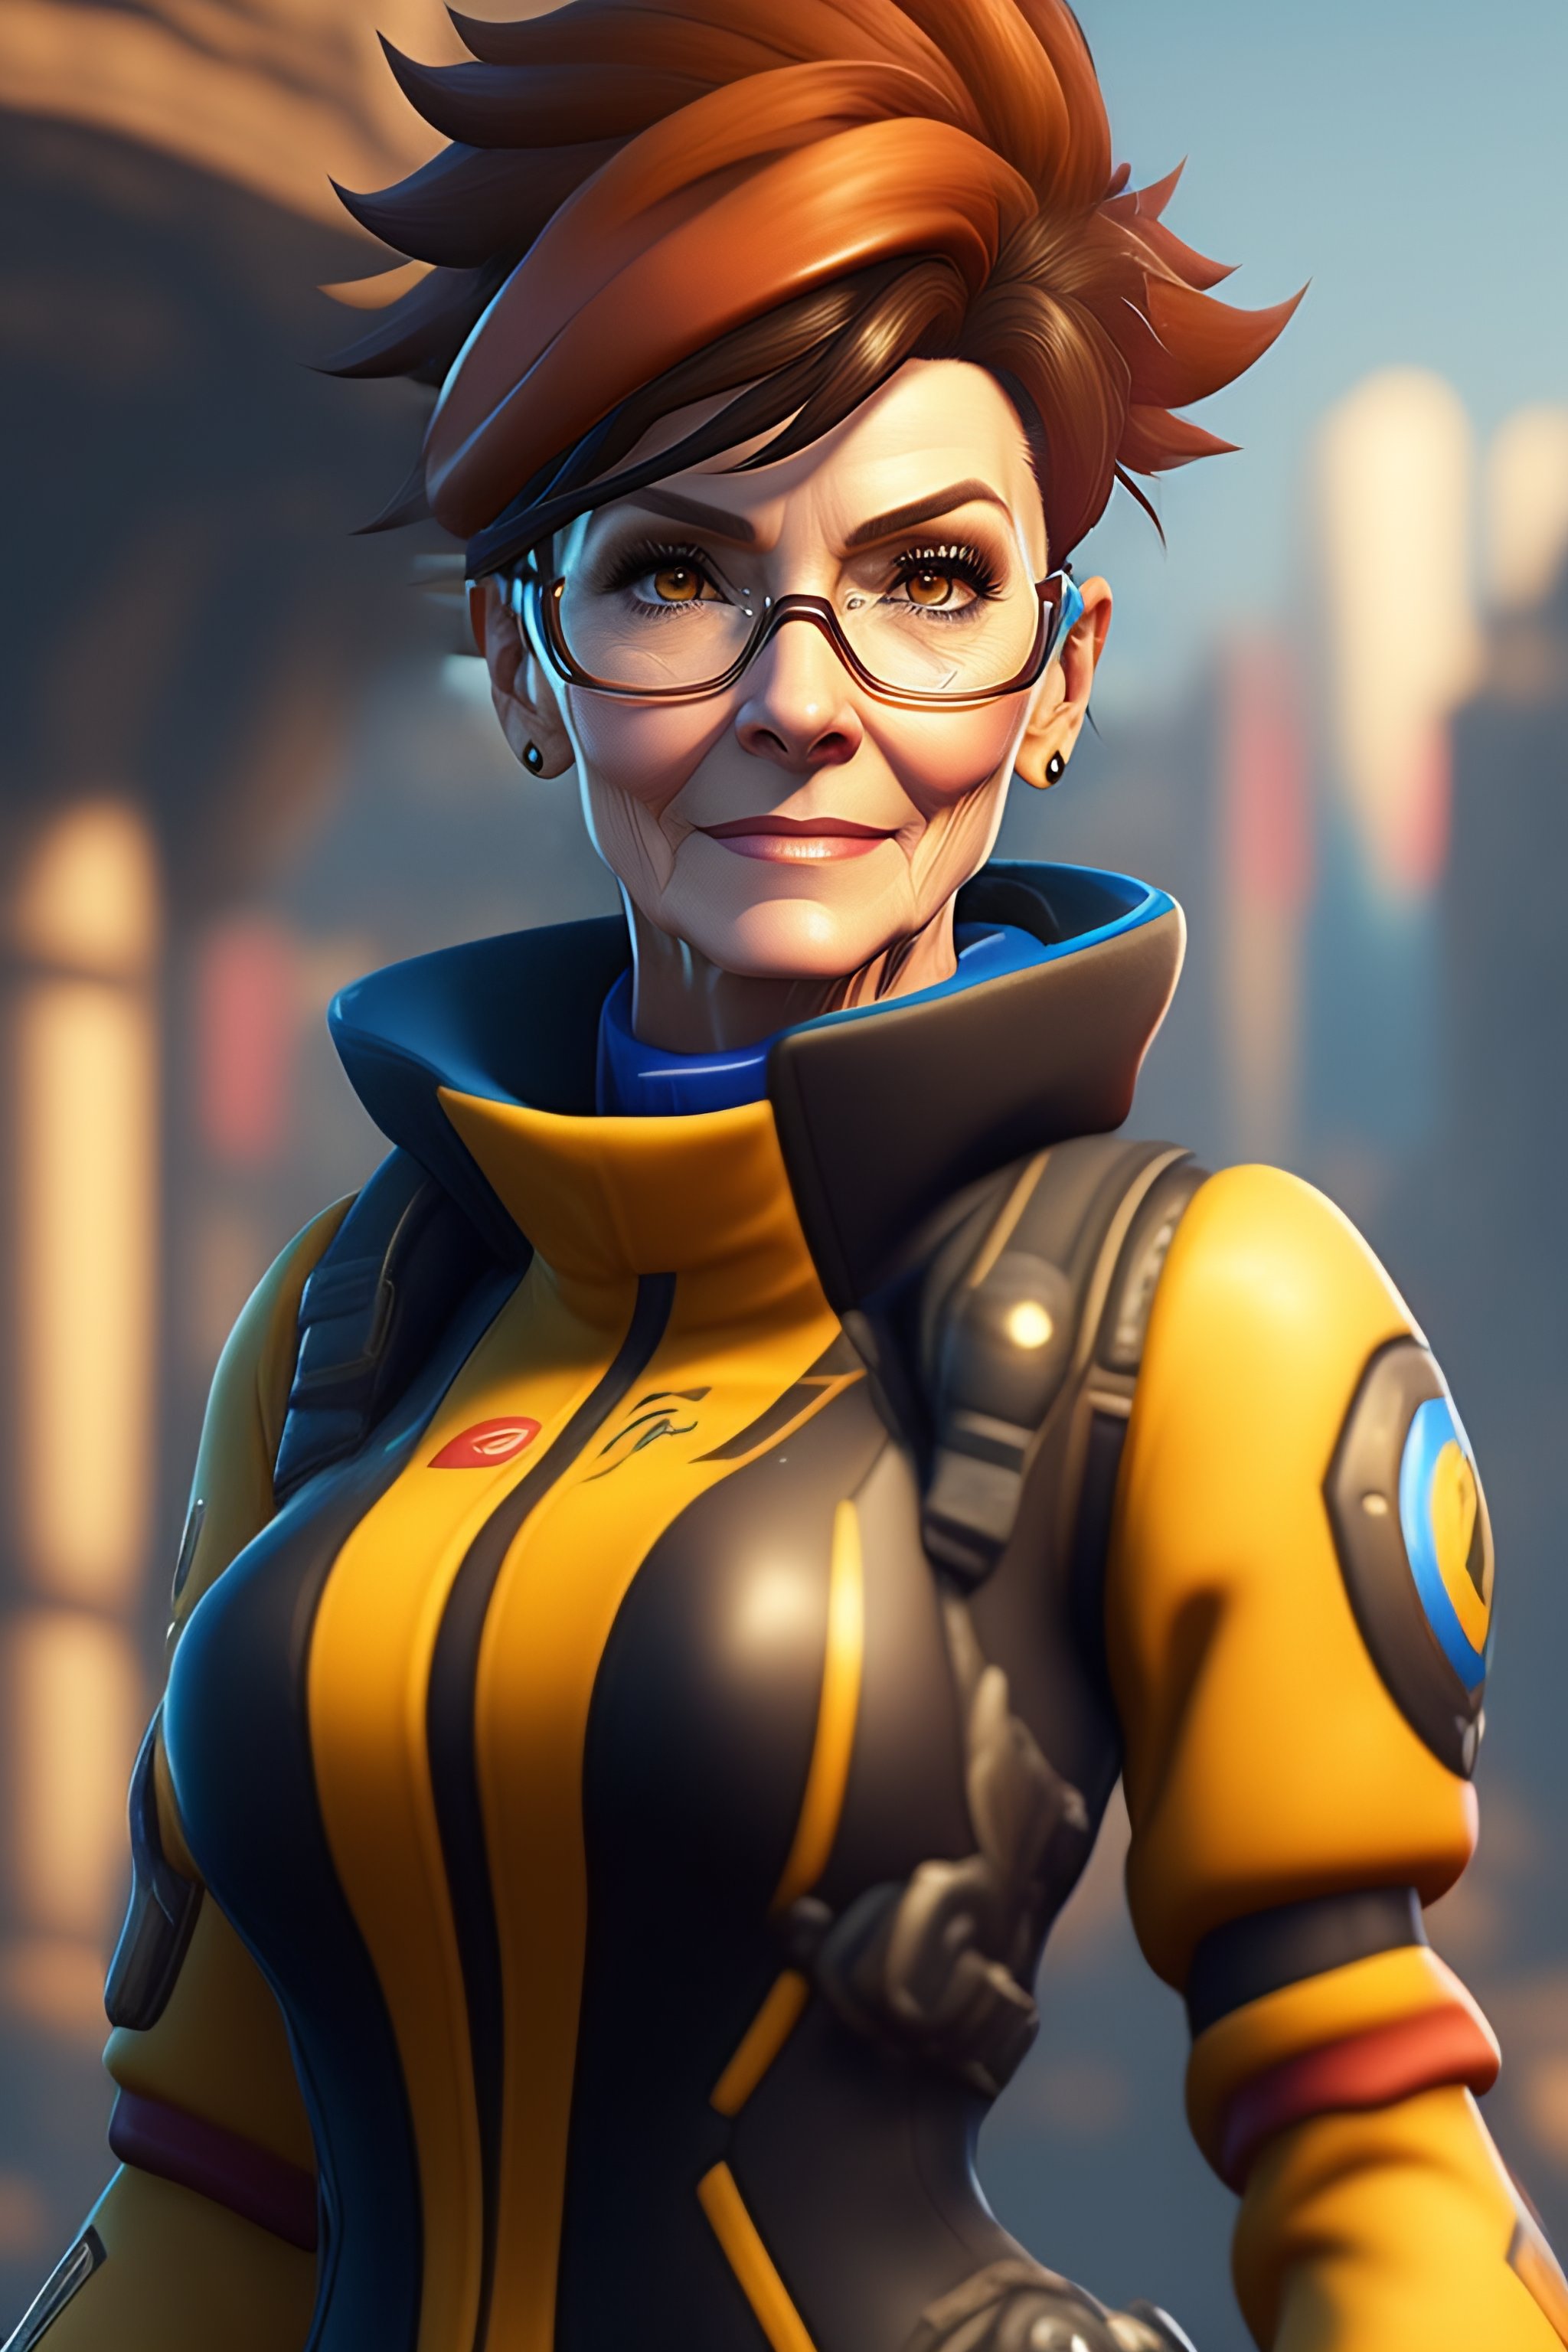 Lexica - Tracer from Overwatch at sixty years of age